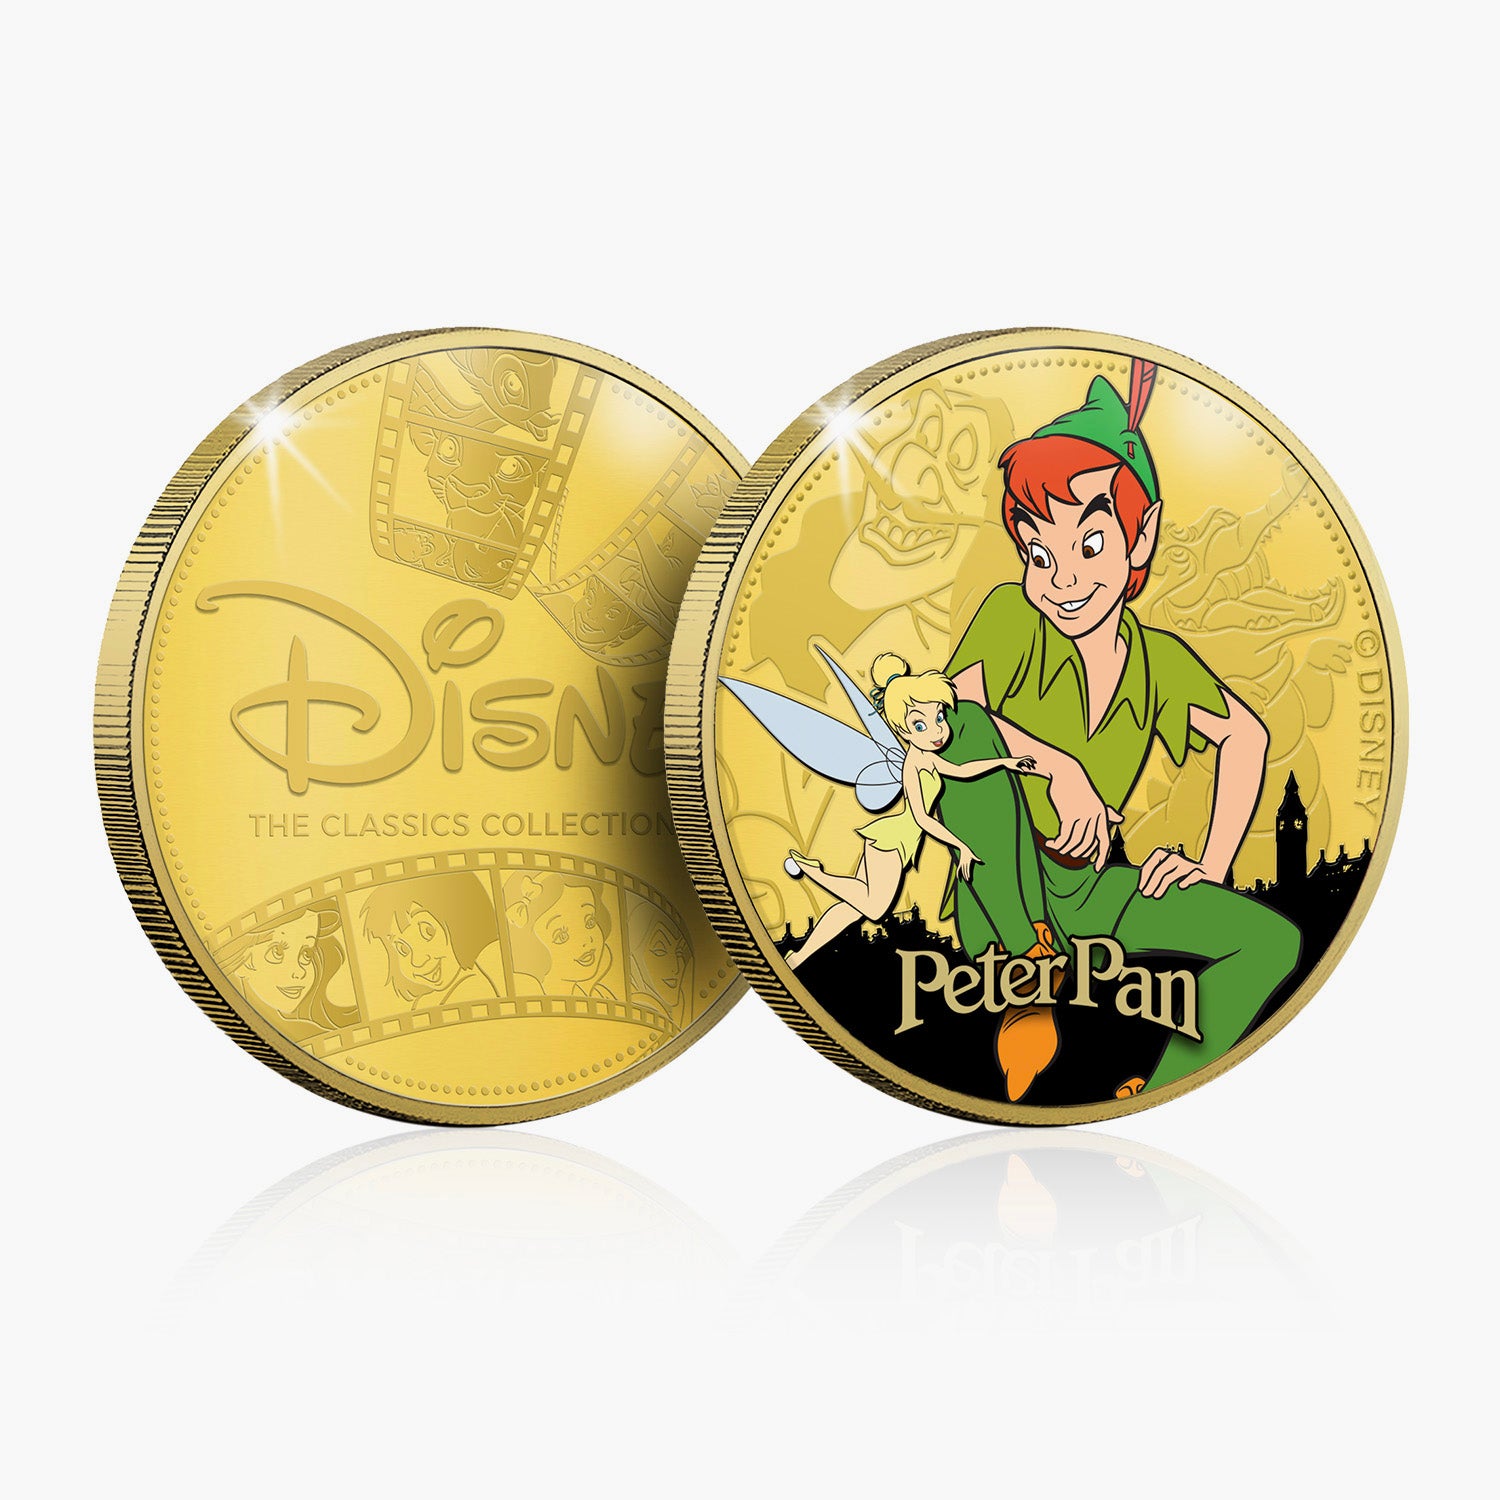 Peter Pan Gold-Plated Commemorative